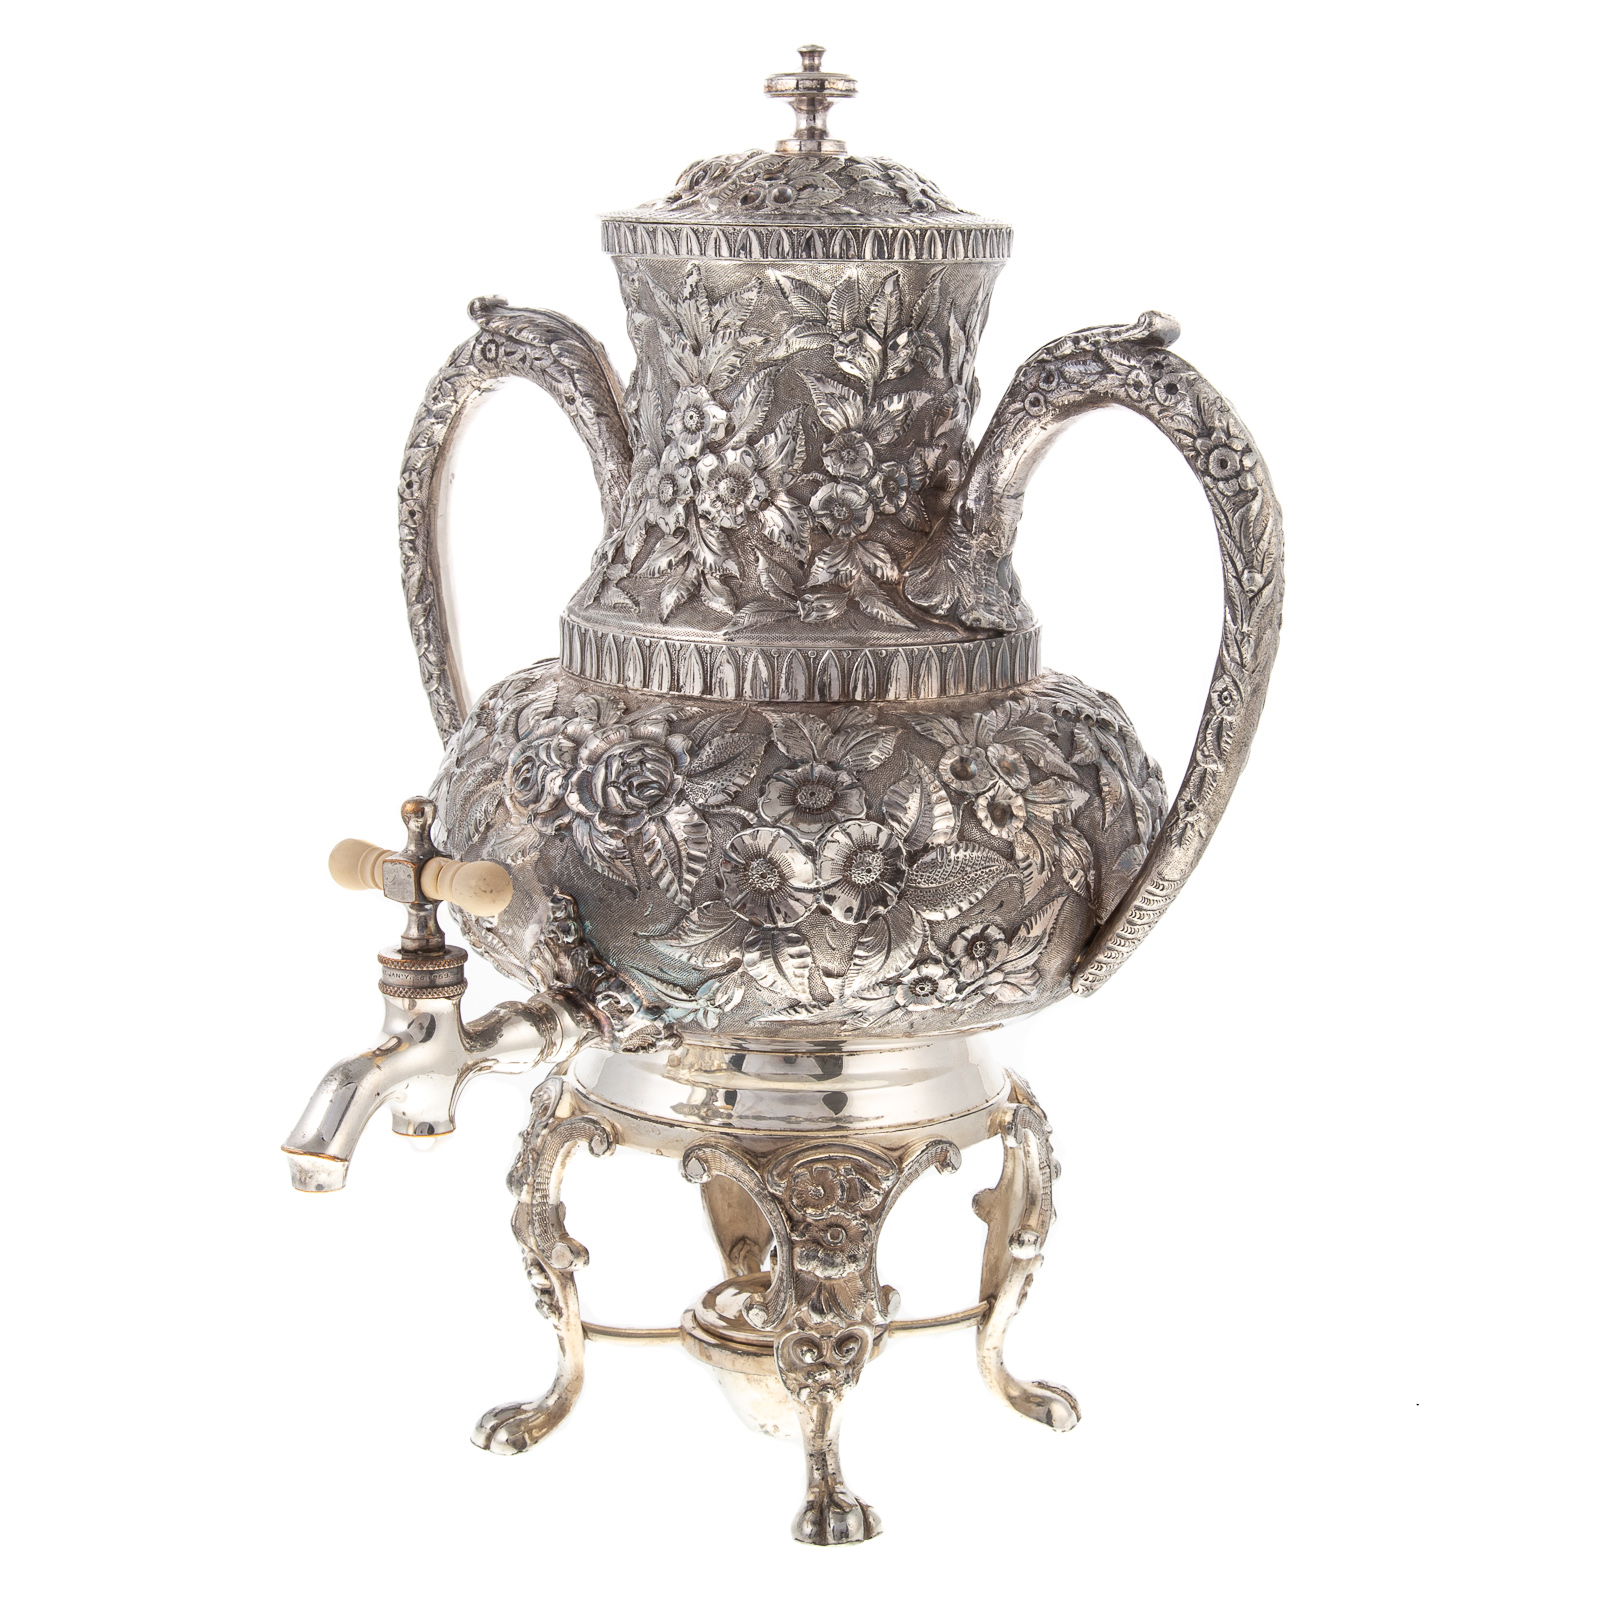 BALTIMORE SILVER PLATED REPOUSSE 334090